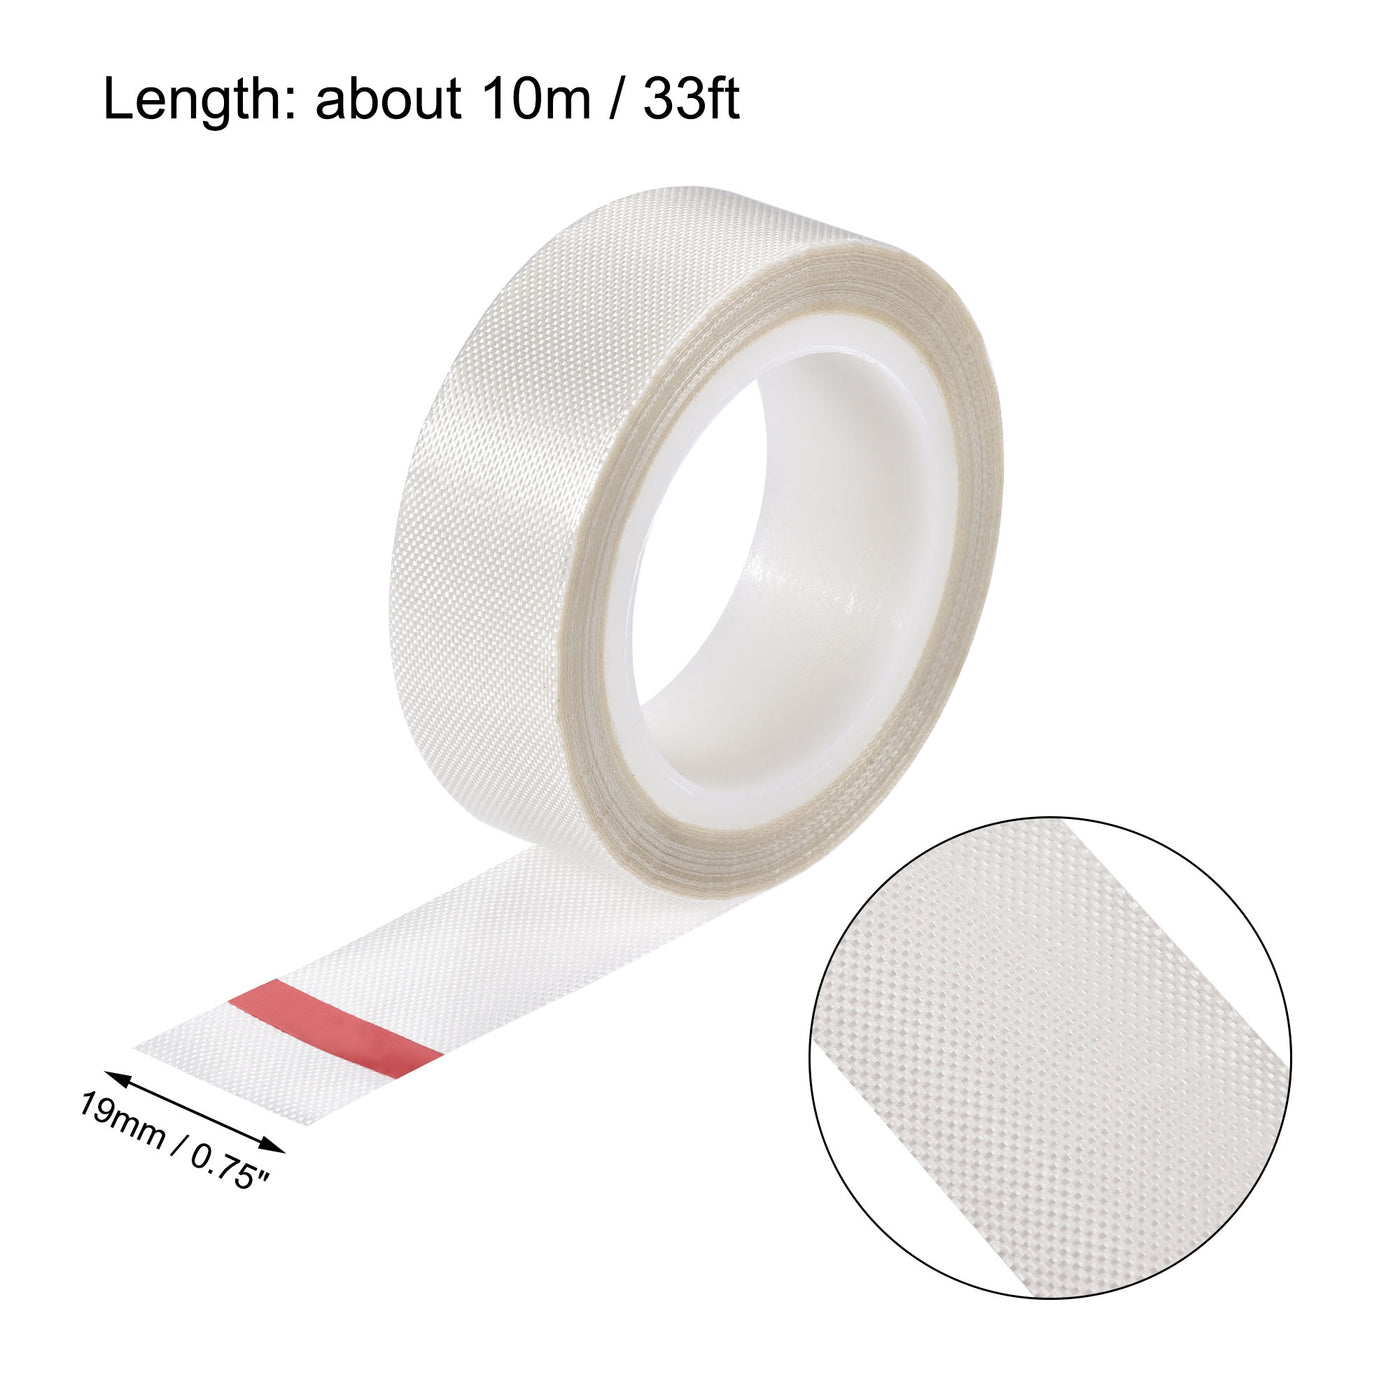 uxcell Uxcell Heat Resistant Tape High Temperature Adhesive Tape 19mm Width 10m Length White